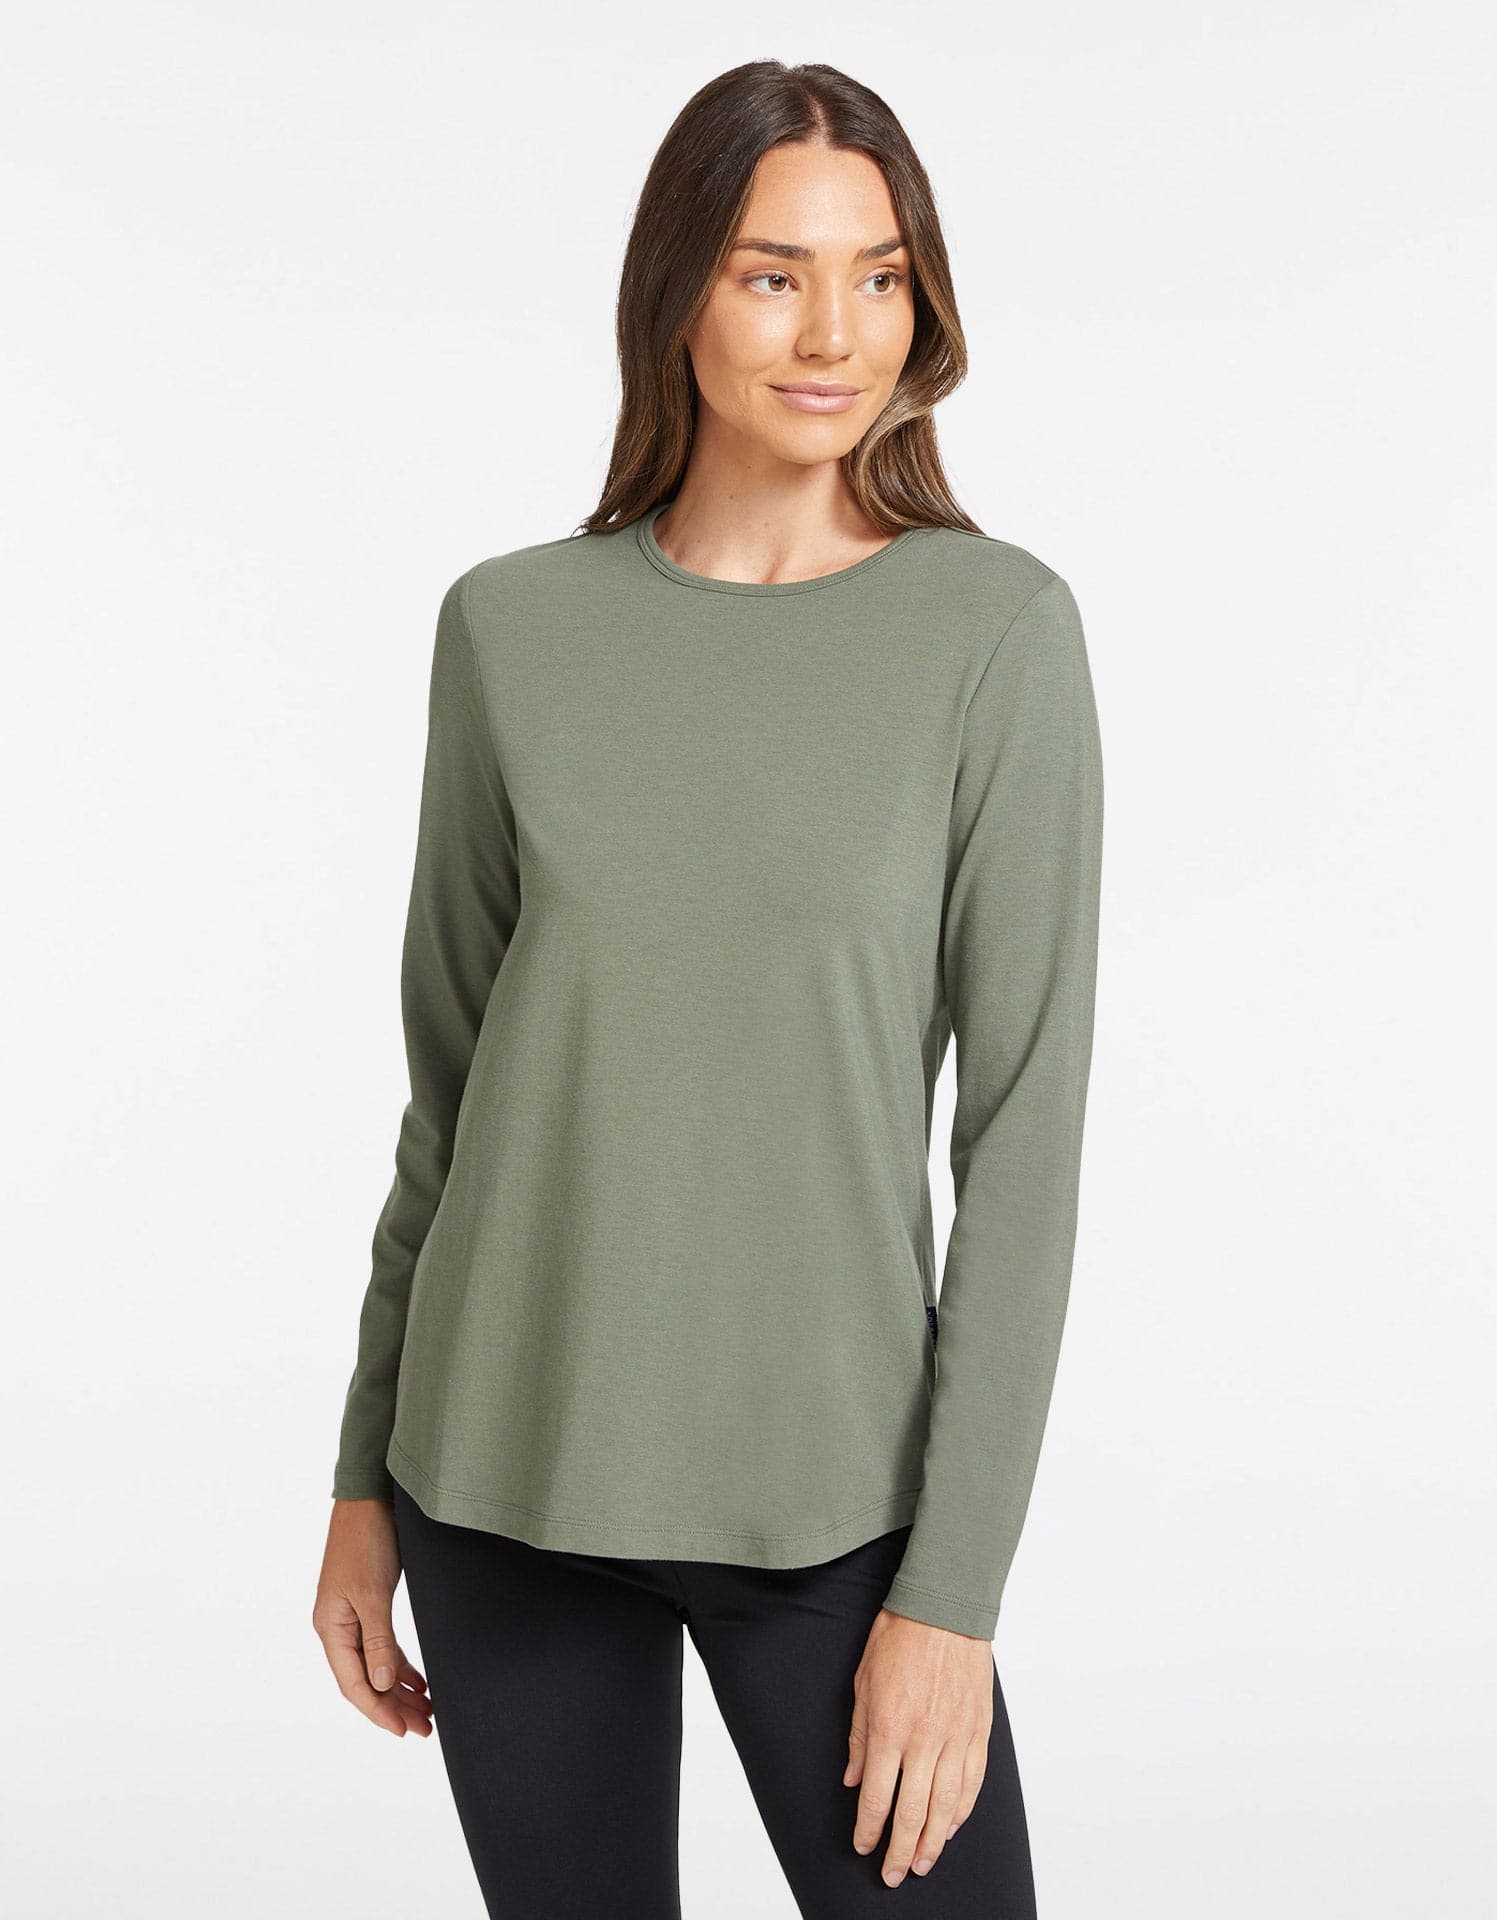 Loose Fit Long Sleeve Swing Top for Women